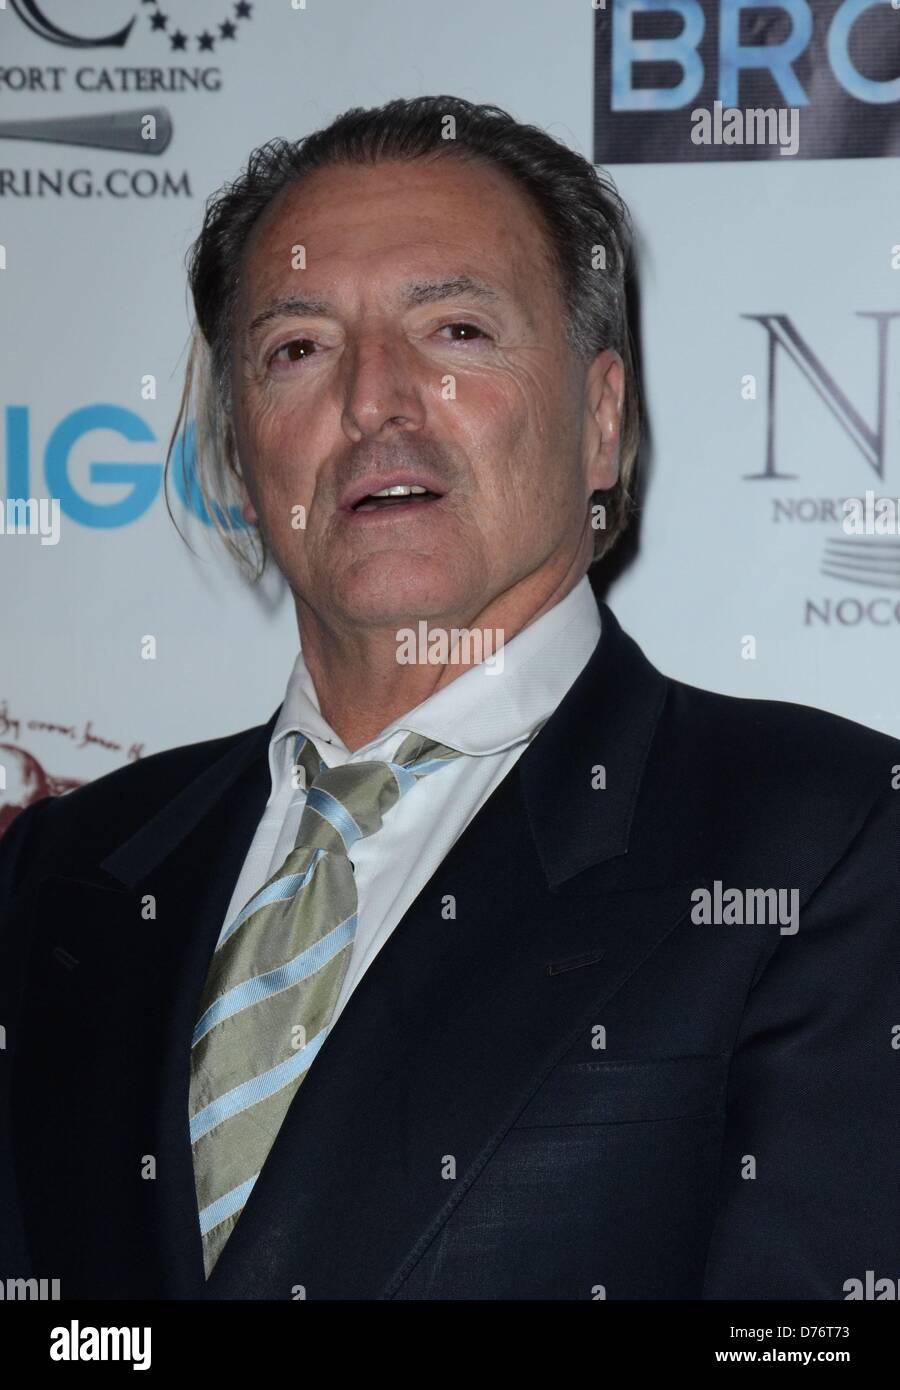 New York, USA. 29th April 2013. Armand Assante at arrivals for ONCE UPON A TIME IN BROOKLYN Premiere, AMC Empire Theatre, New York, NY April 29, 2013. Photo By: Derek Storm/Everett Collection/ Alamy Live News Stock Photo